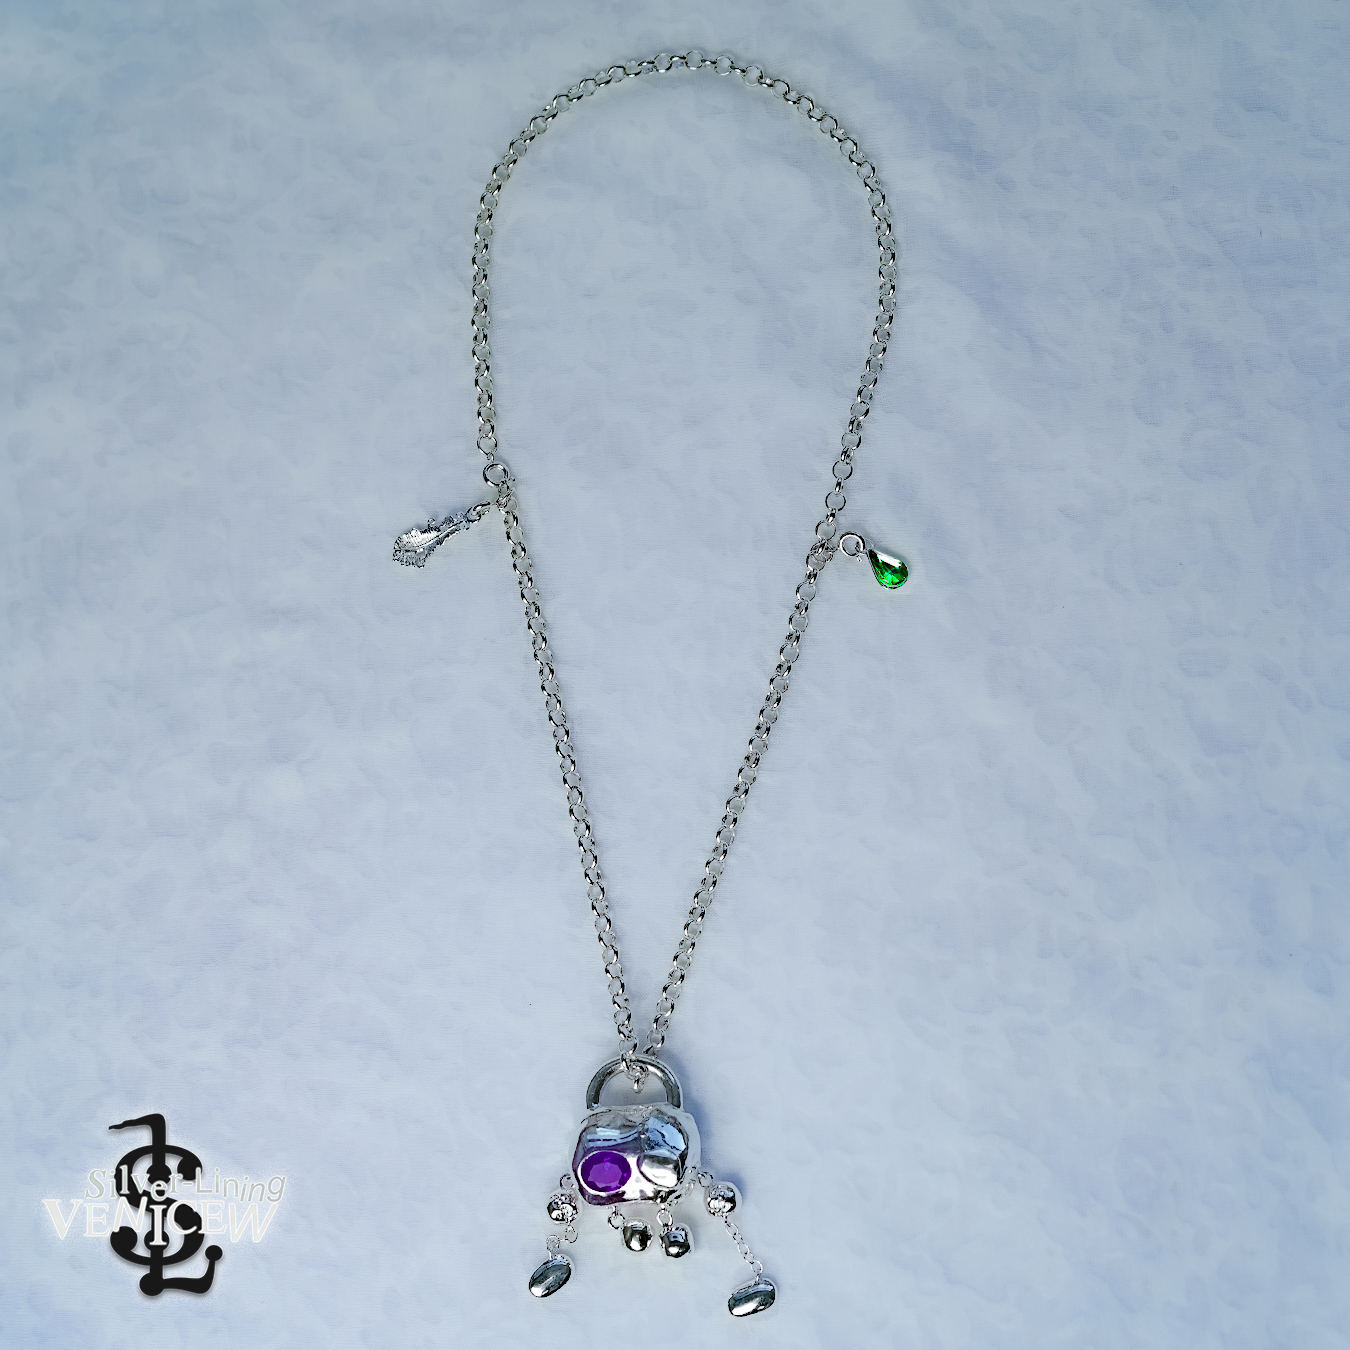 SLII-N5= StoneGod Jr and Thin Chain Necklace